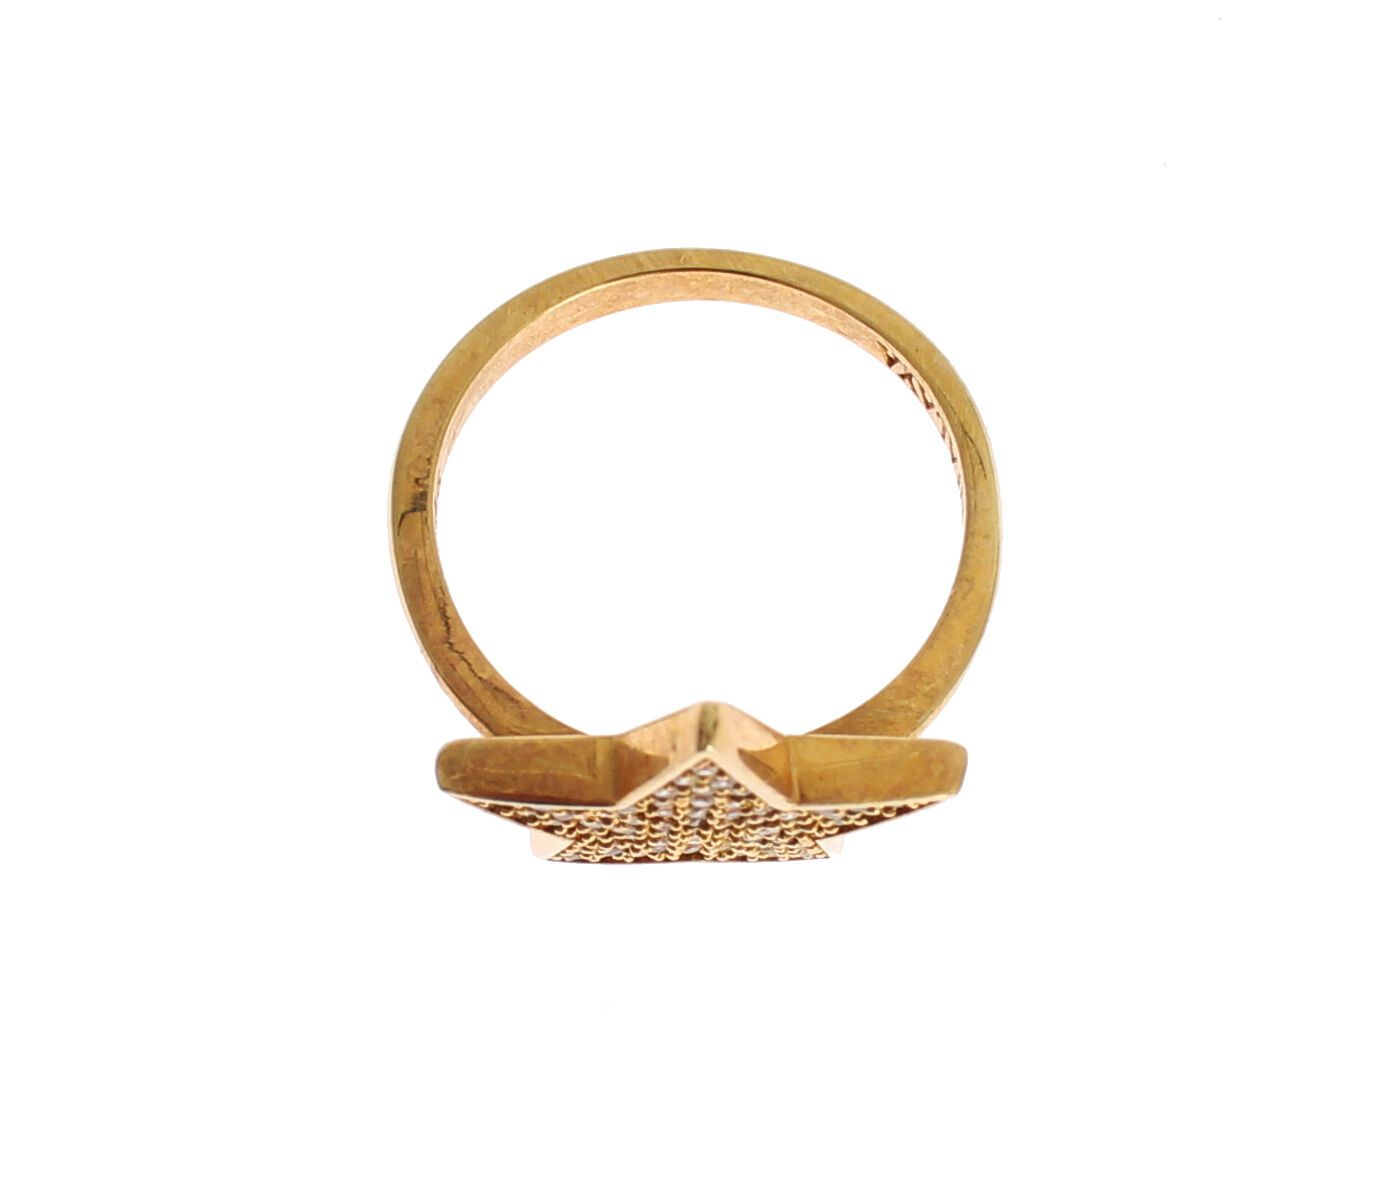 Elegant Gold-Plated Sterling Silver Ring with CZ Crystals